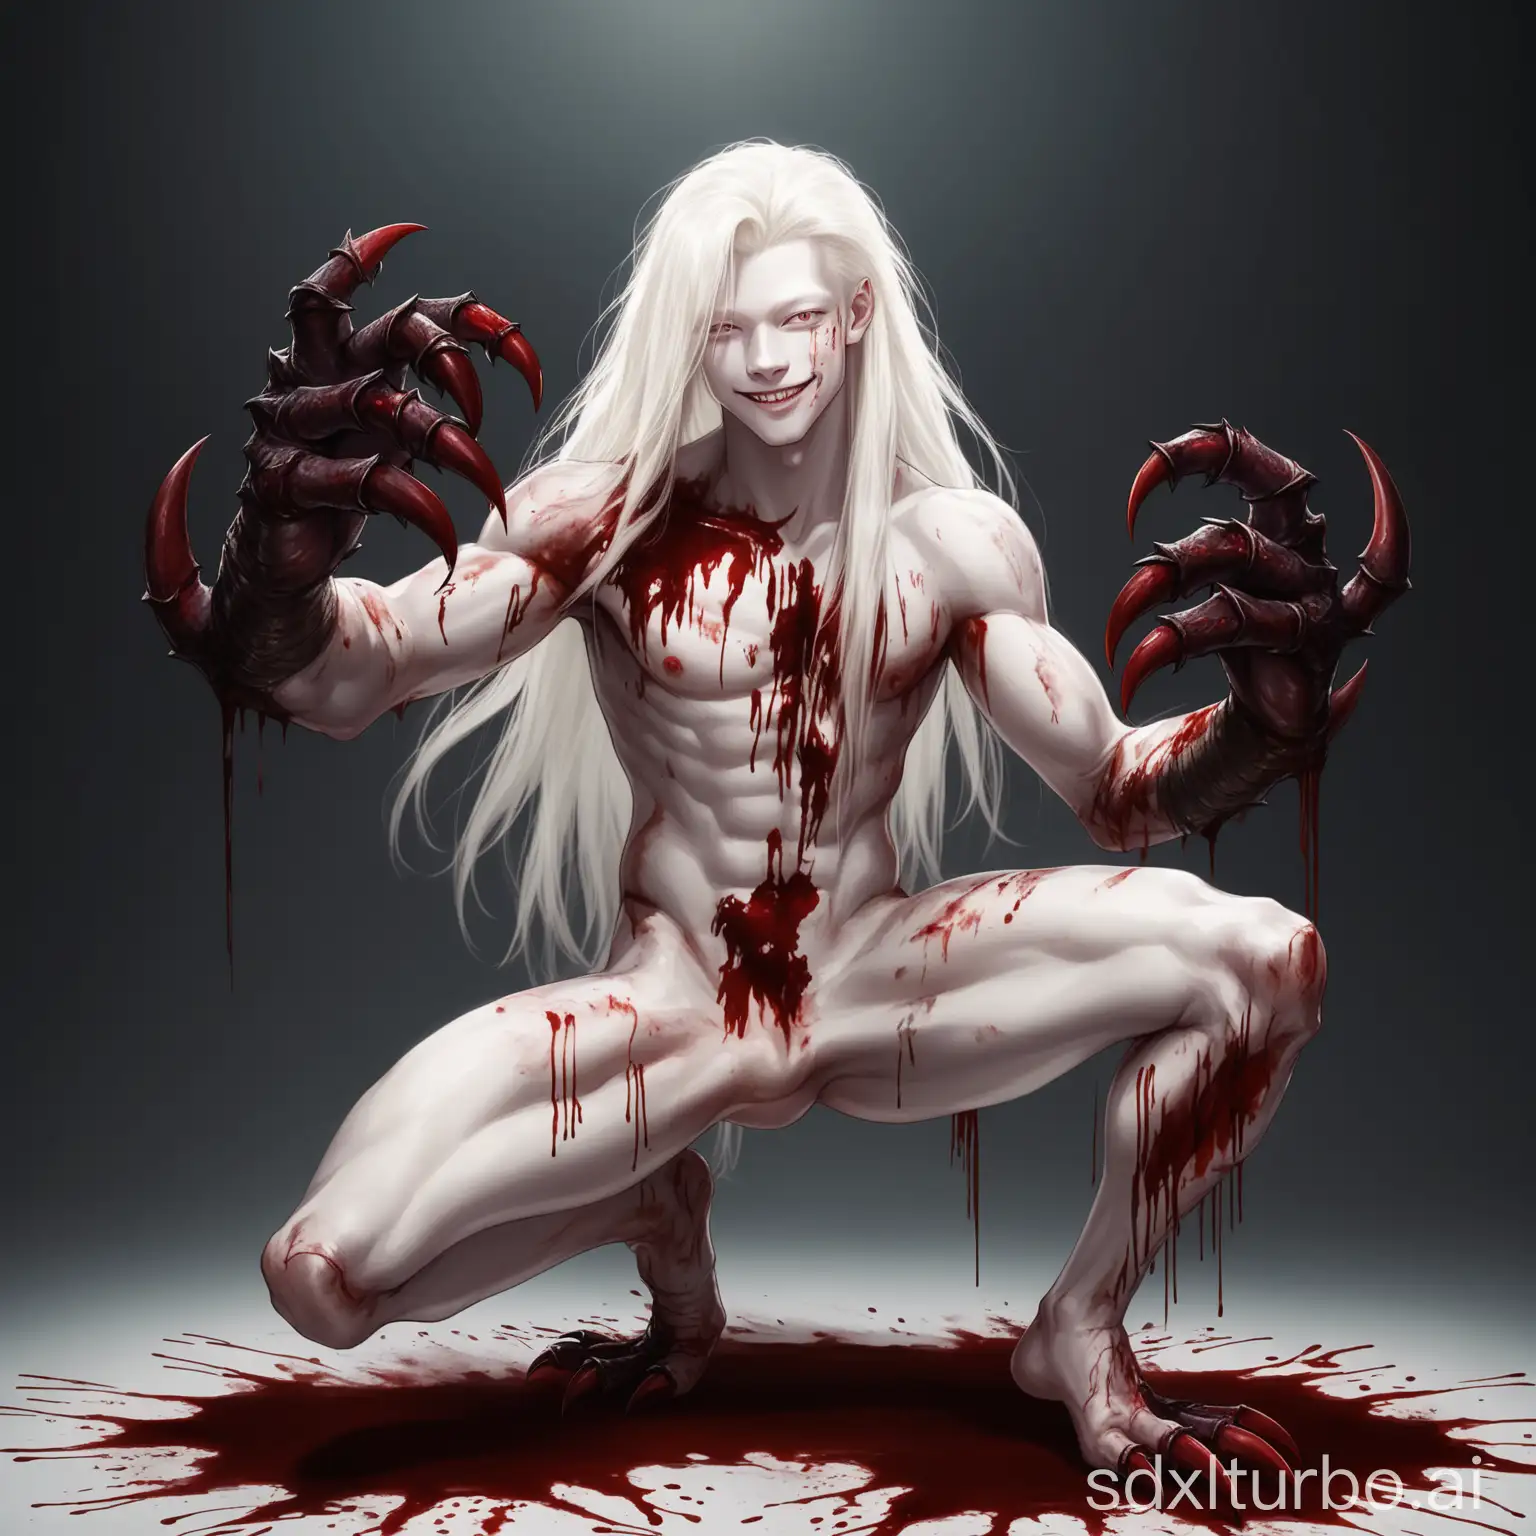 Albino monster handsome young man, long hair with bangs, with gore blood stains on the body, open legs, with claws, smiling, sensual posing, full body,